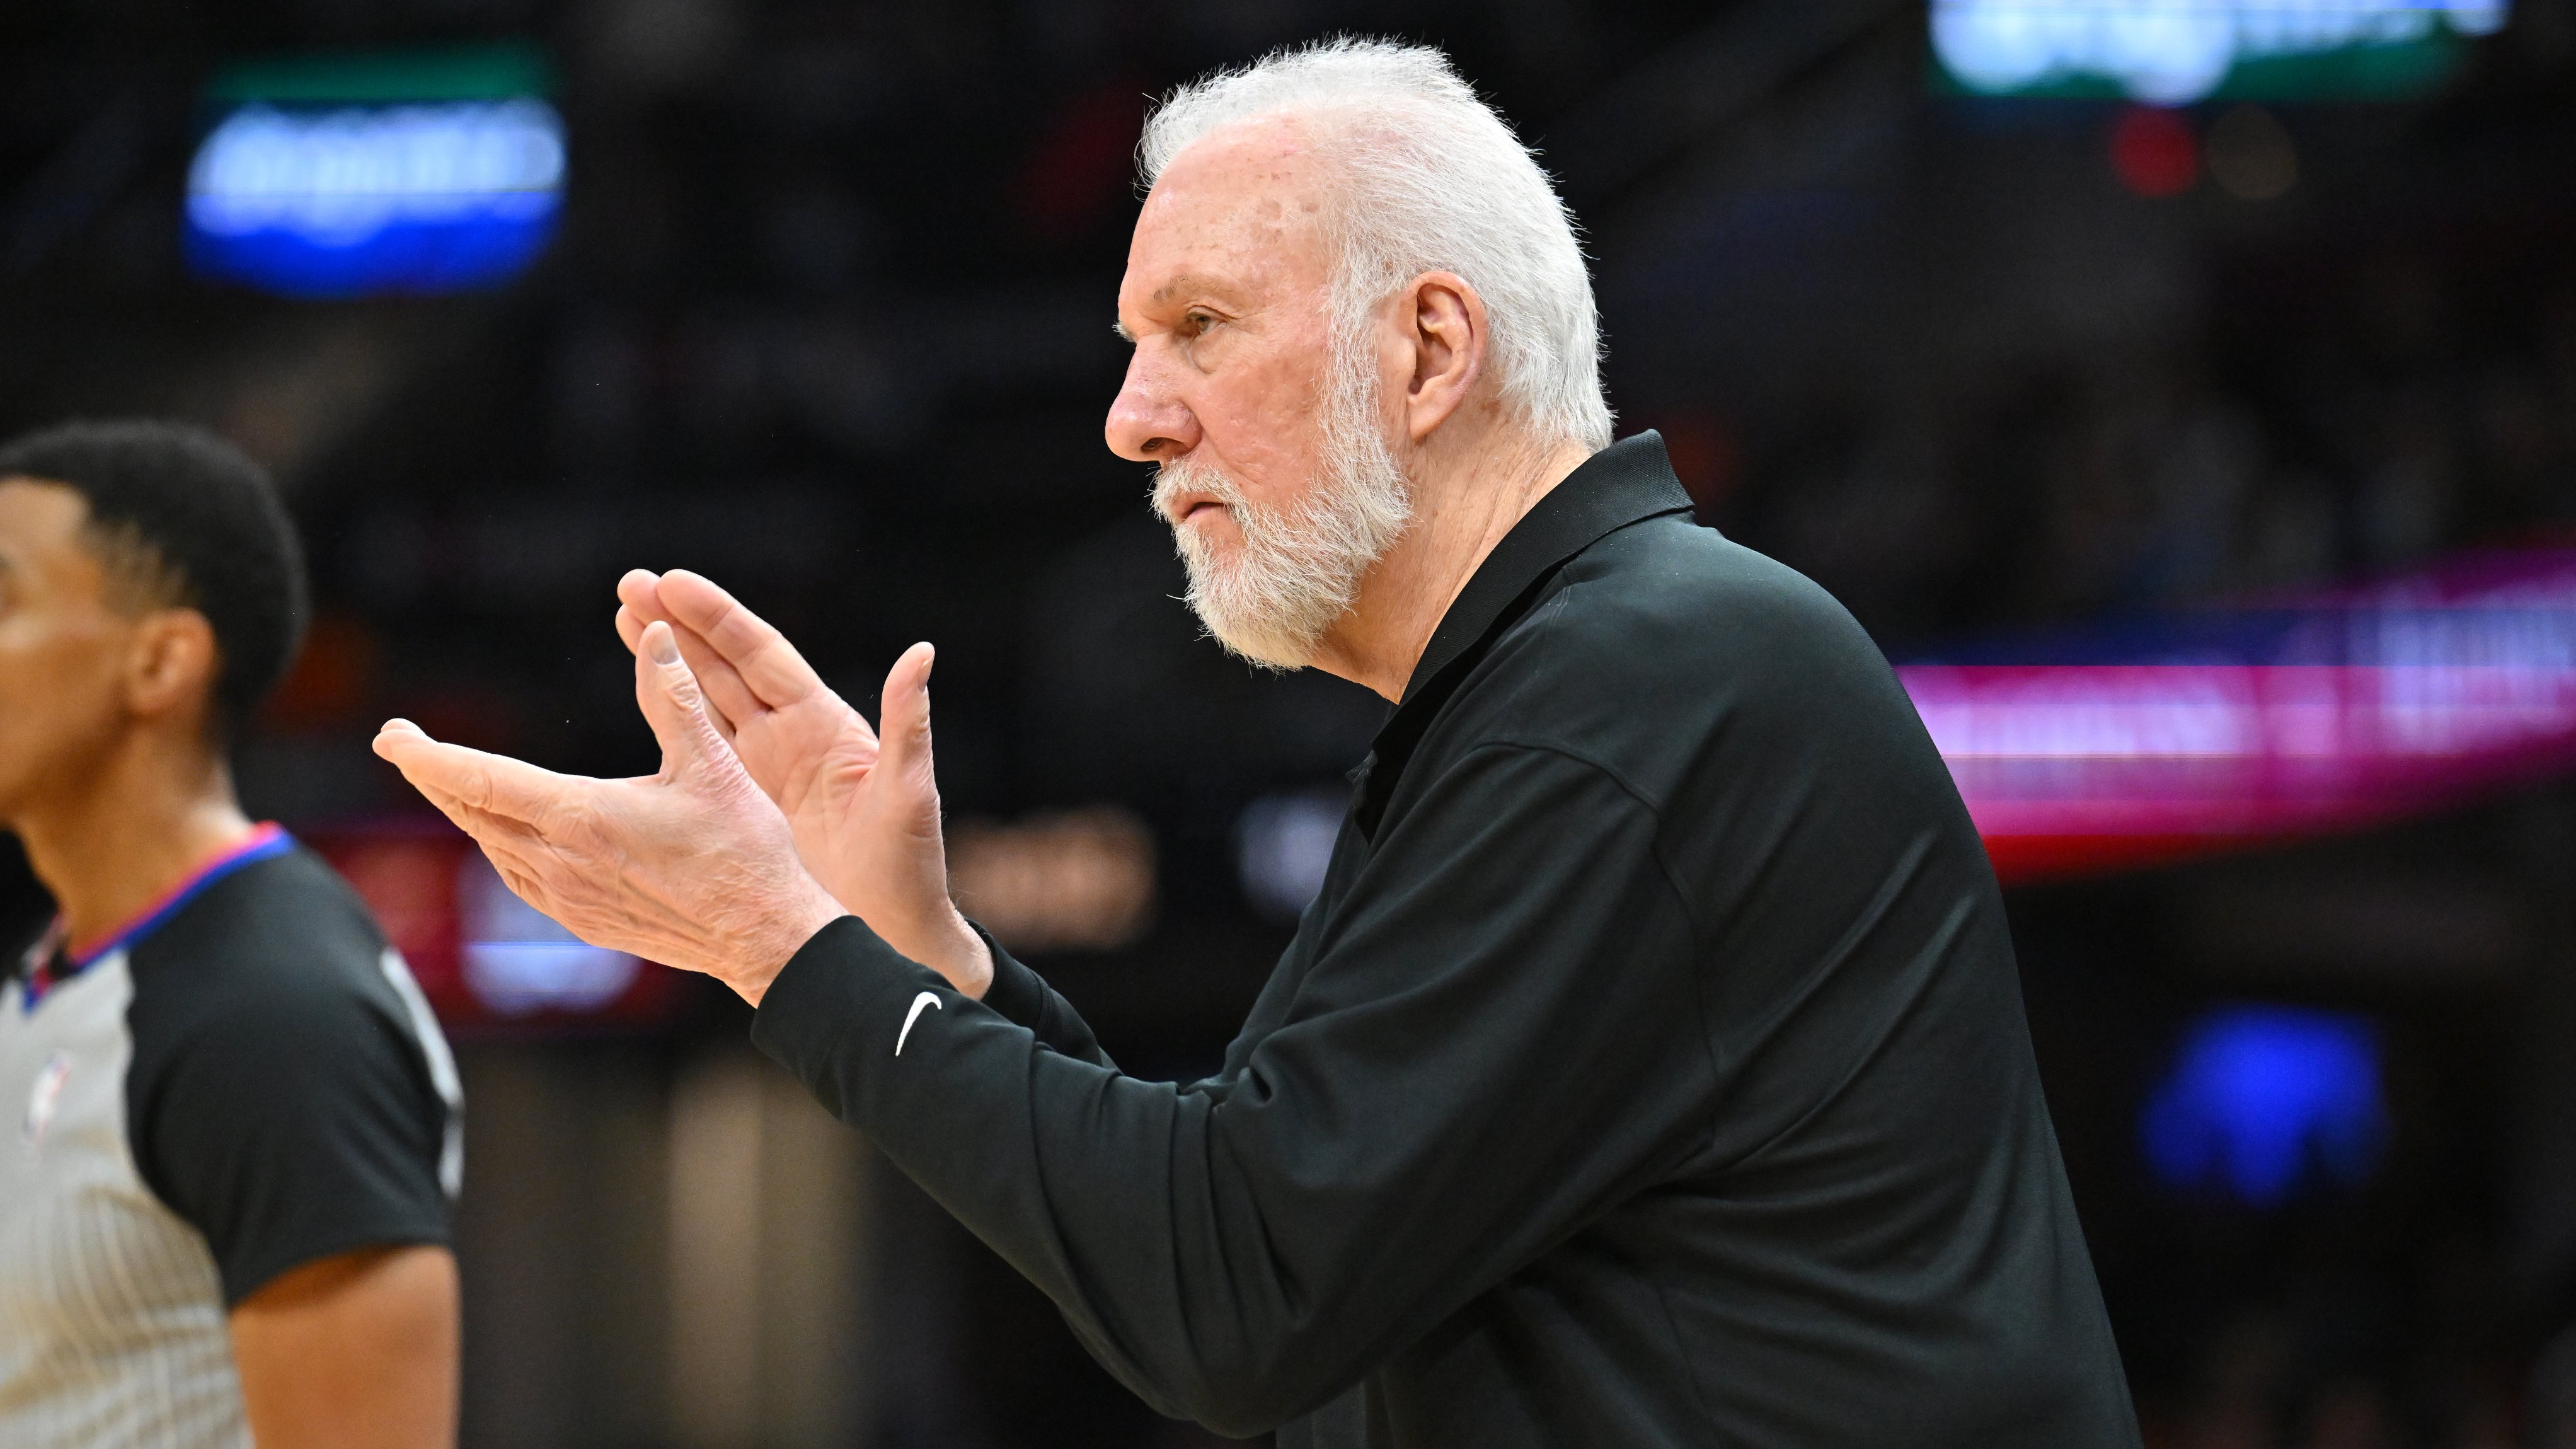 Popovich sends signals he'll continue as Spurs coach